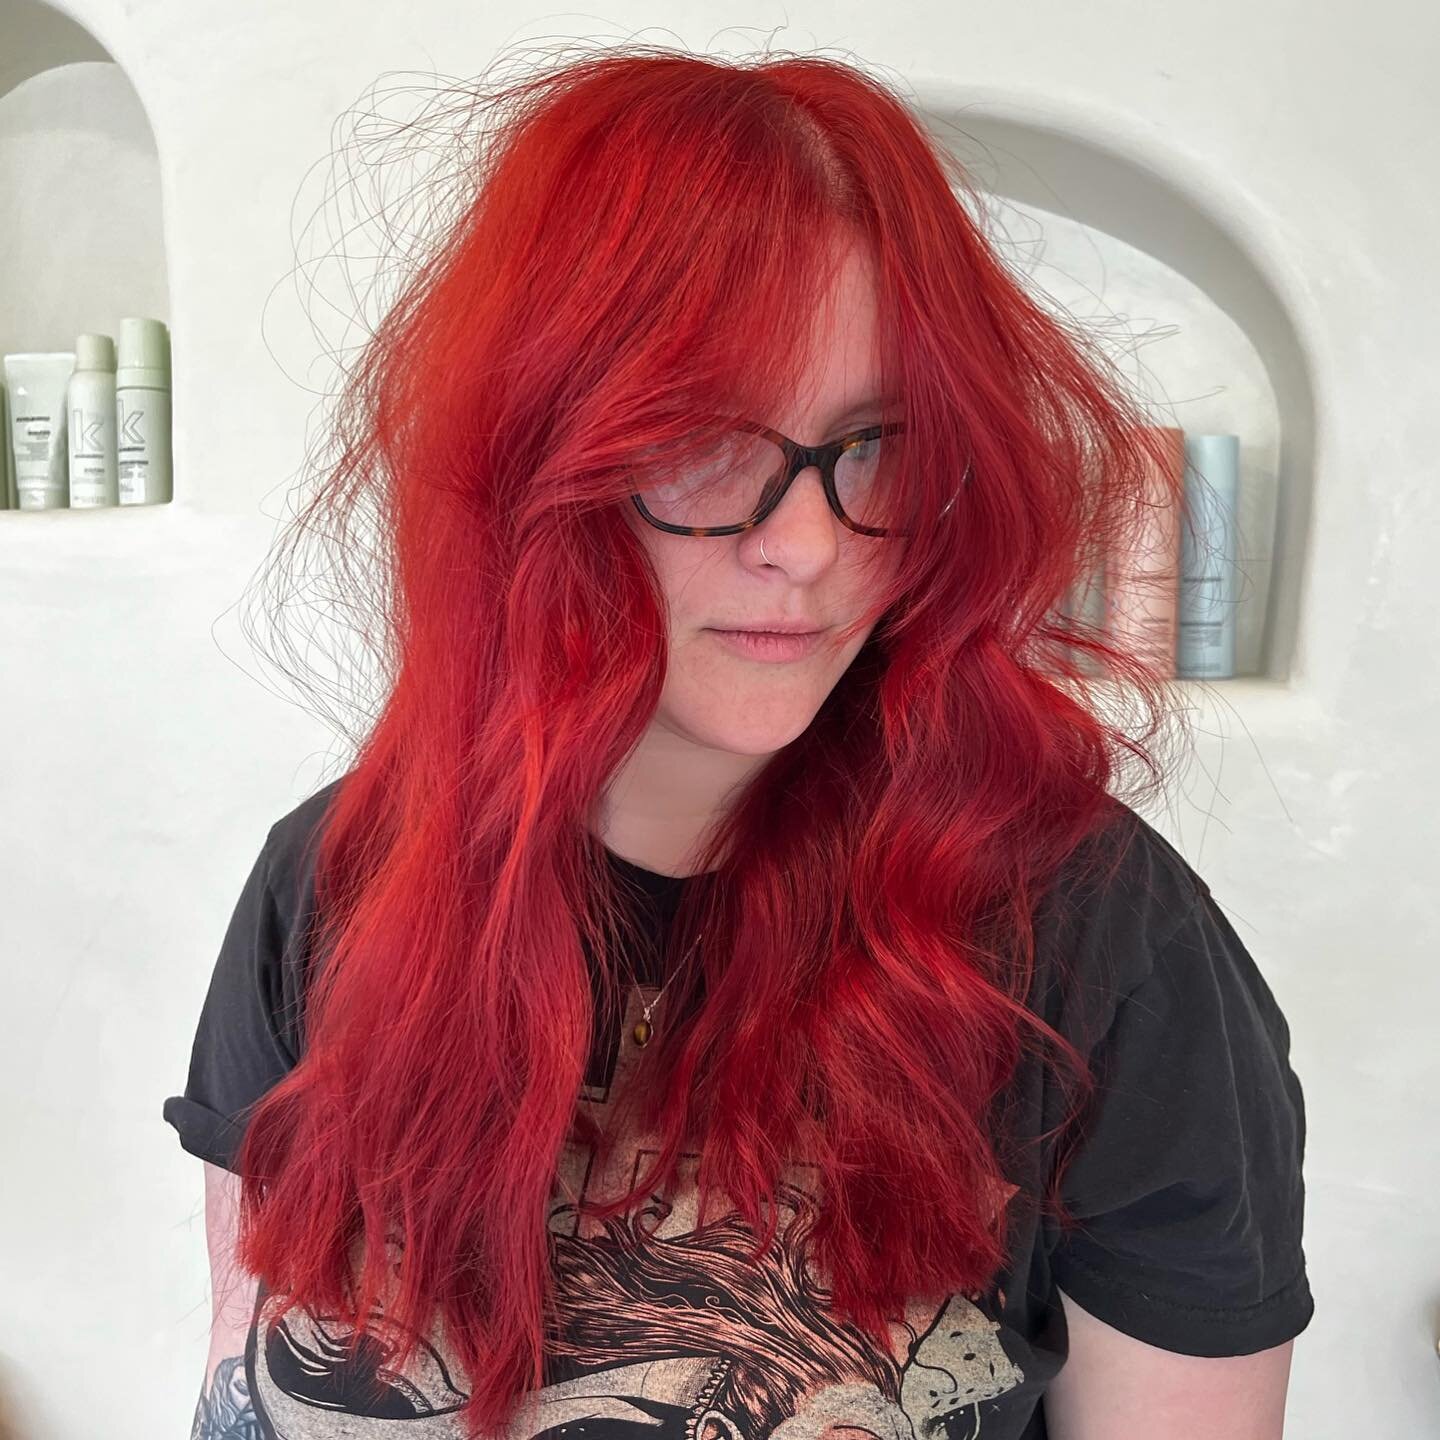 There&rsquo;s just something about the color red ❤️&zwj;🔥
.
cut x color combo by stylist @manisvanity 🫶🏽
.
#abqsalon#albuquerquehair#albuquerquehairstylist#newmexicohairstylist#redhair#albuquerquesalon